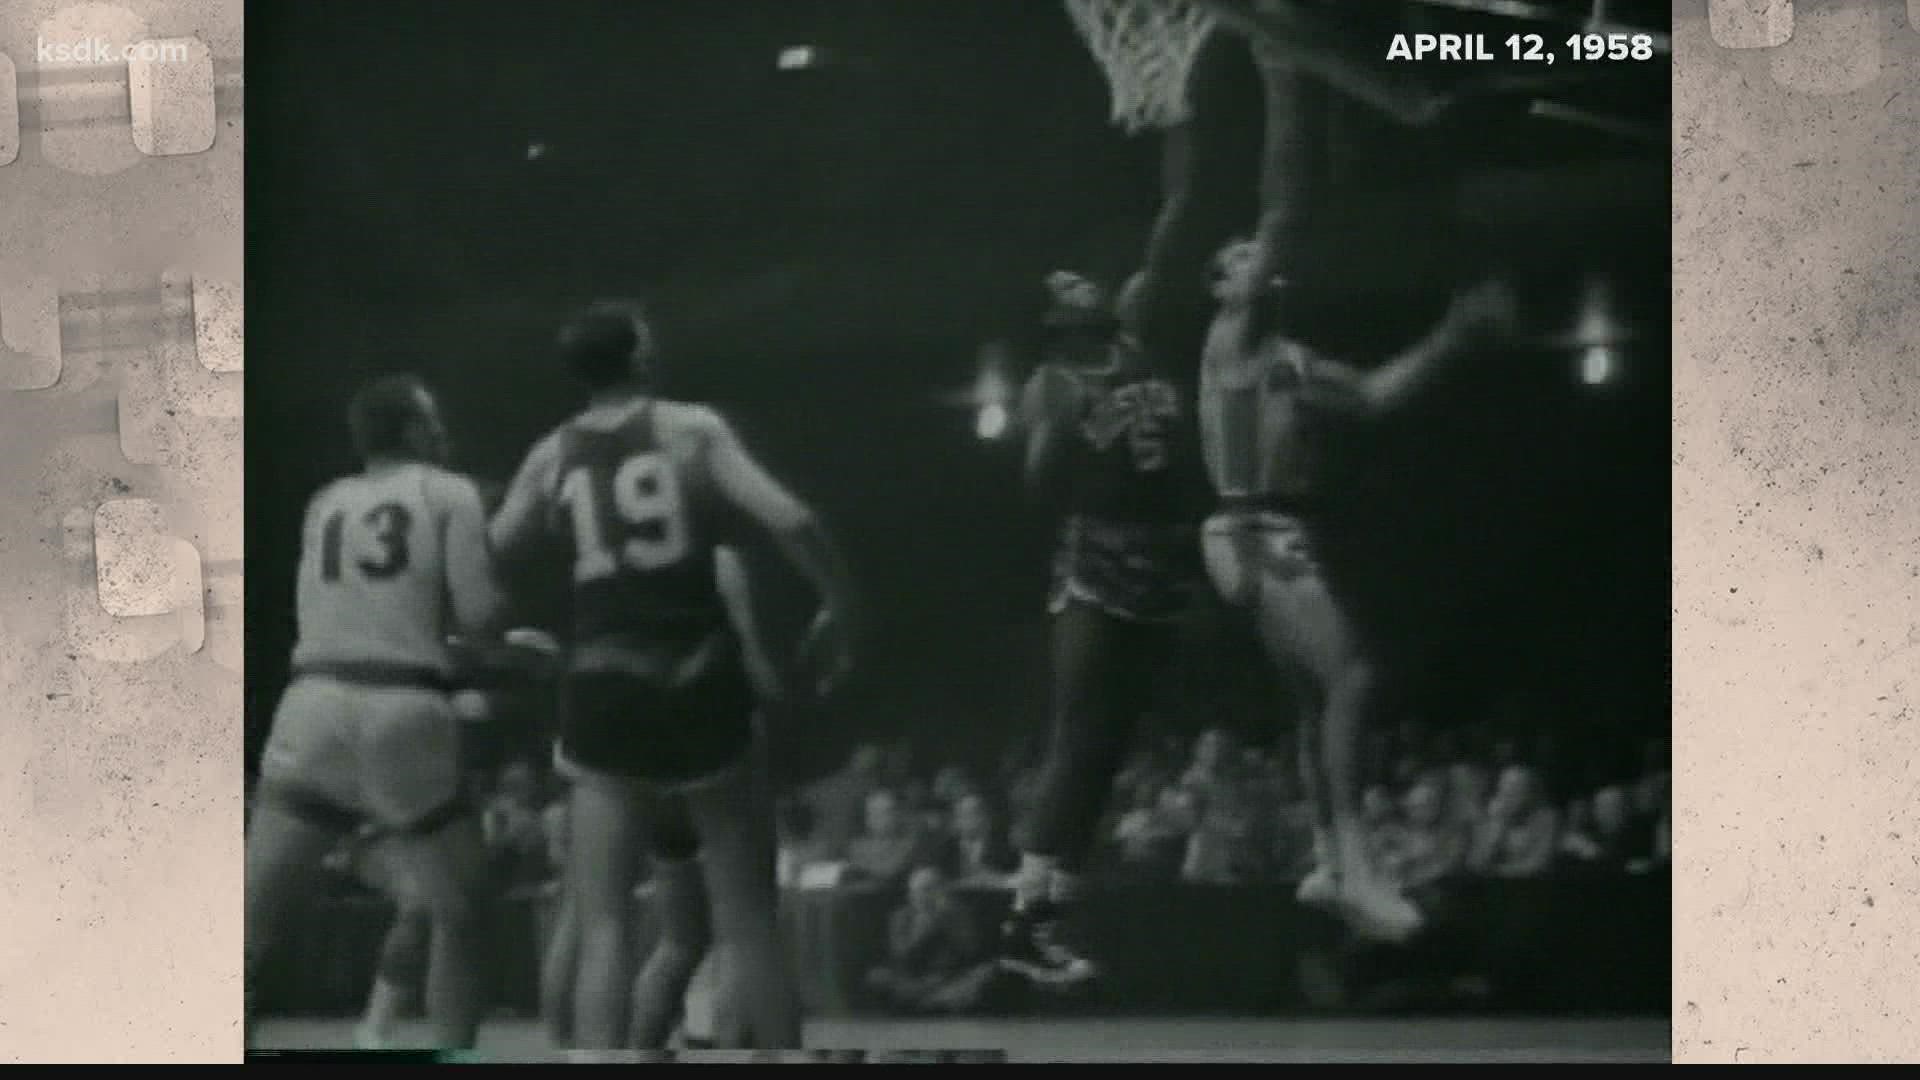 This week's Vintage KSDK goes back to April 12, 1958. It was the night the NBA's St. Louis Hawks won the championship, defeating the Boston Celtics for the title.